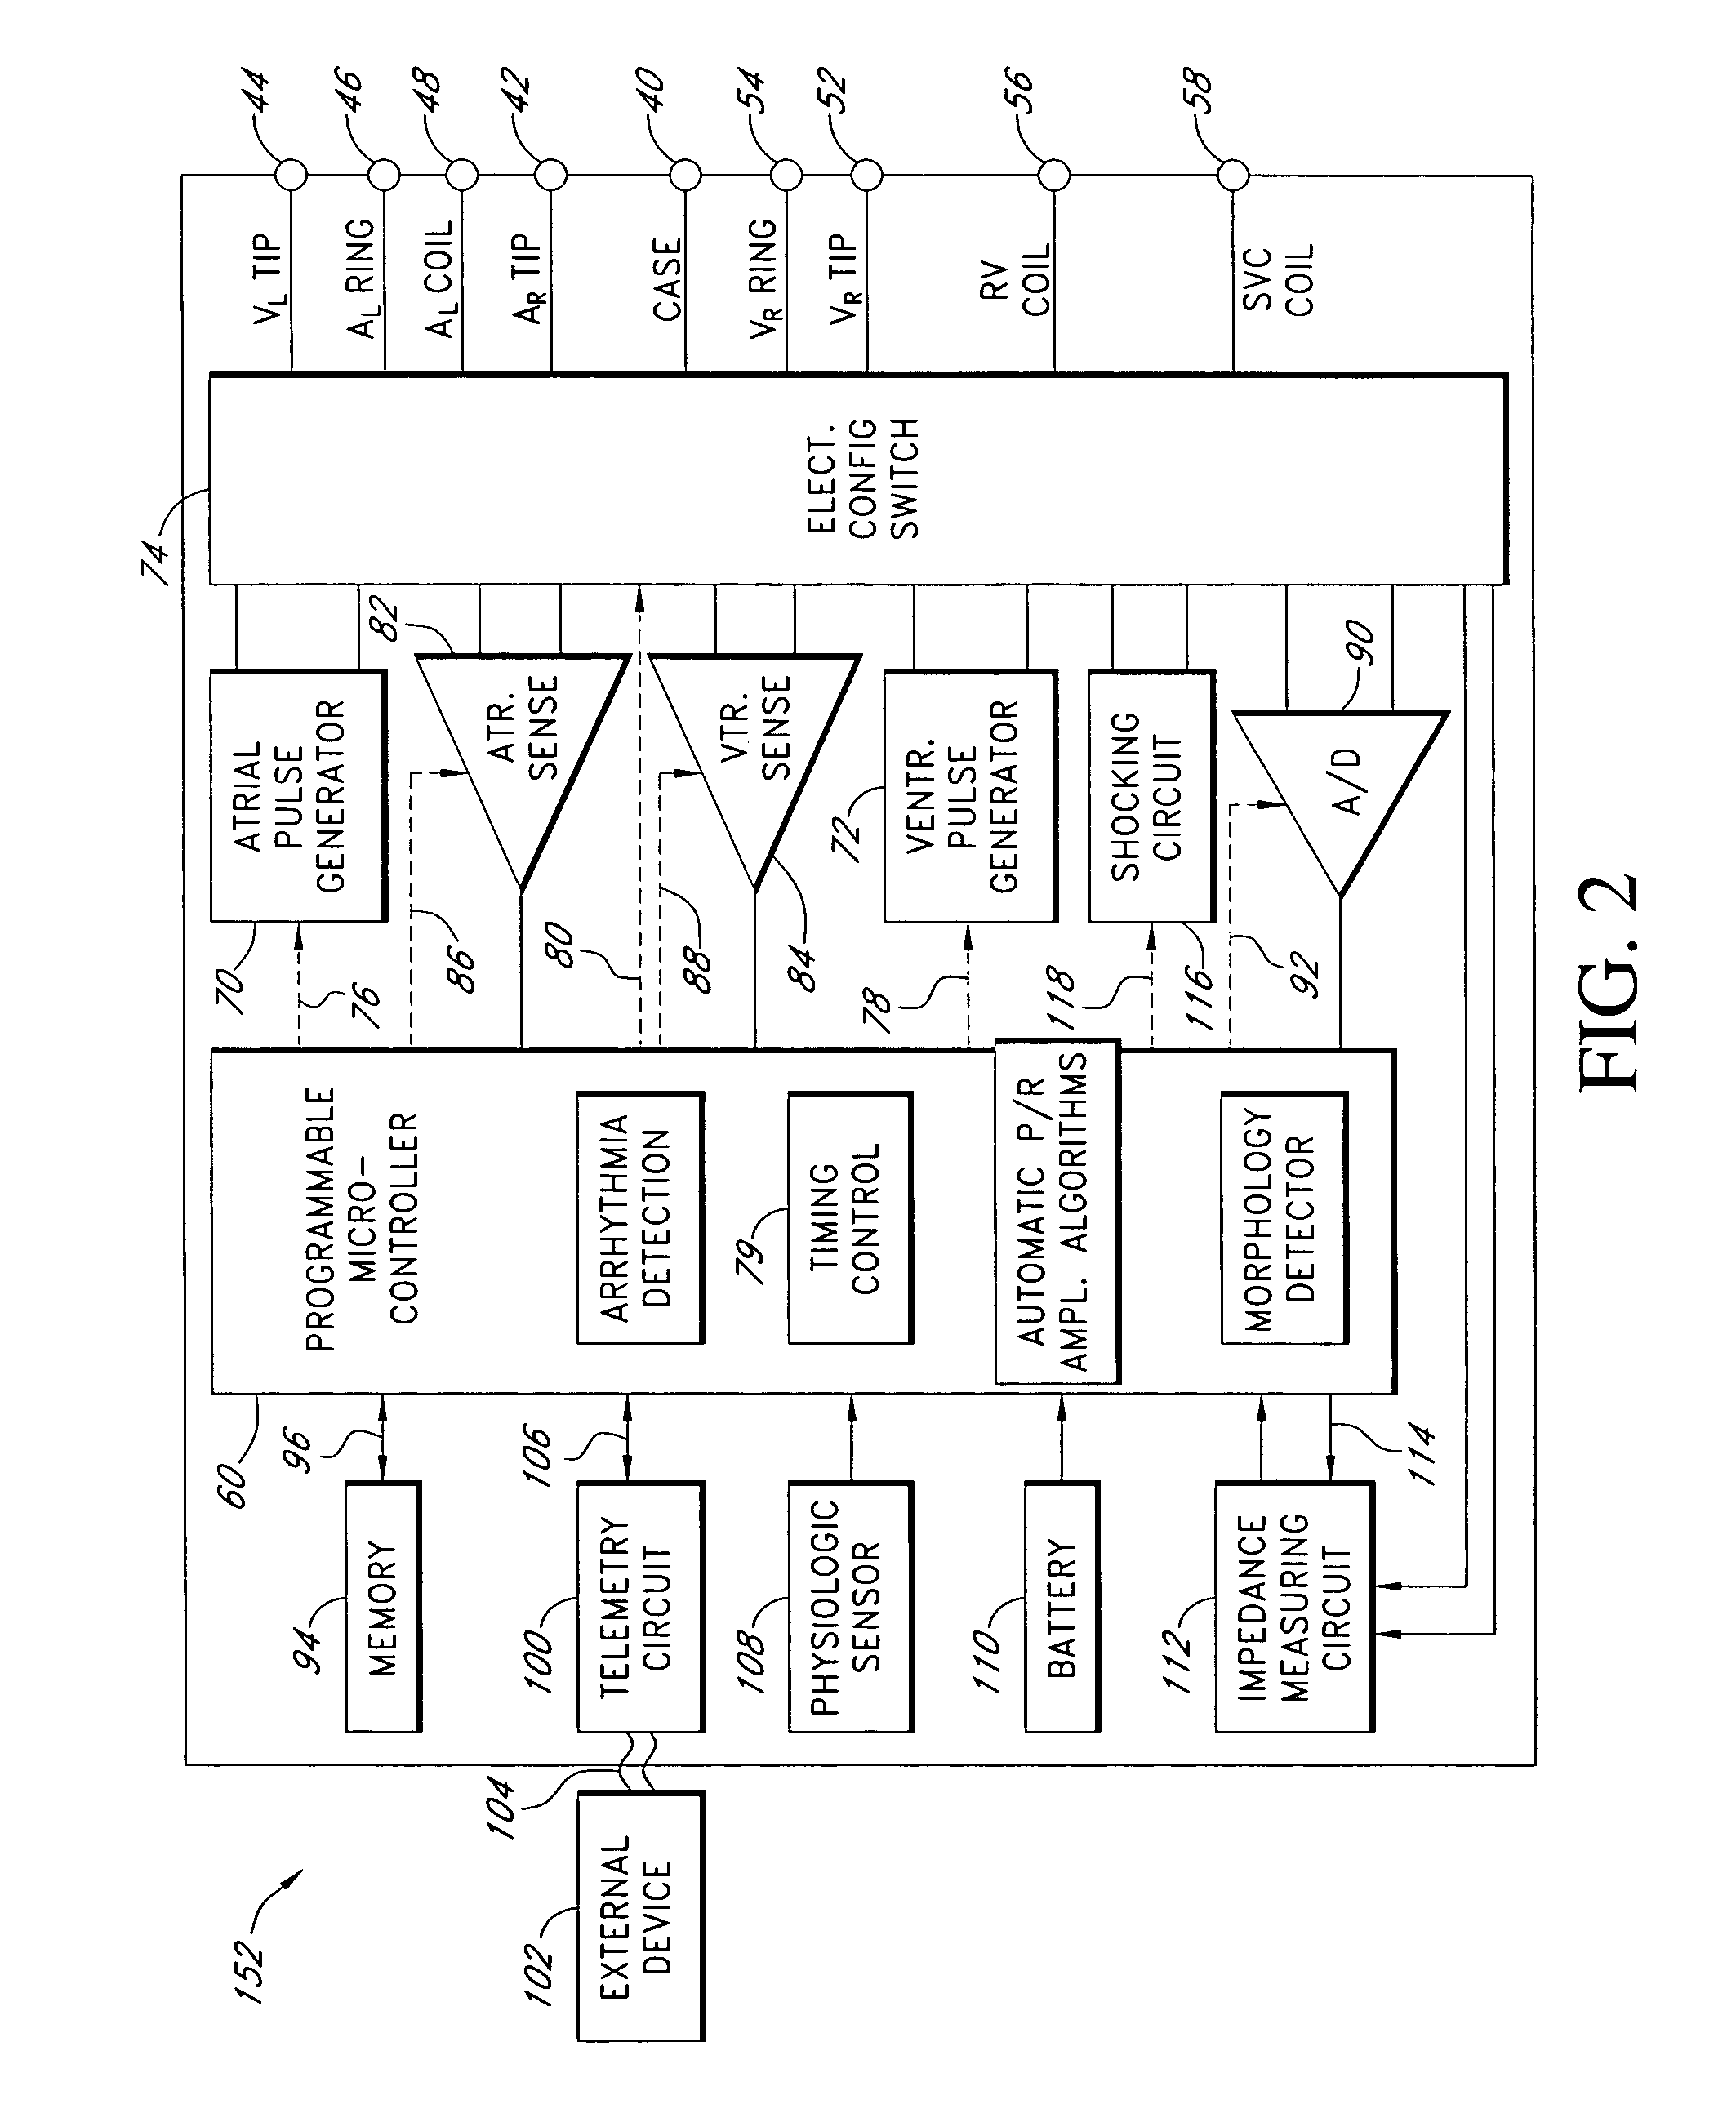 Automatic signal amplitude measurement system in the setting of abnormal rhythms